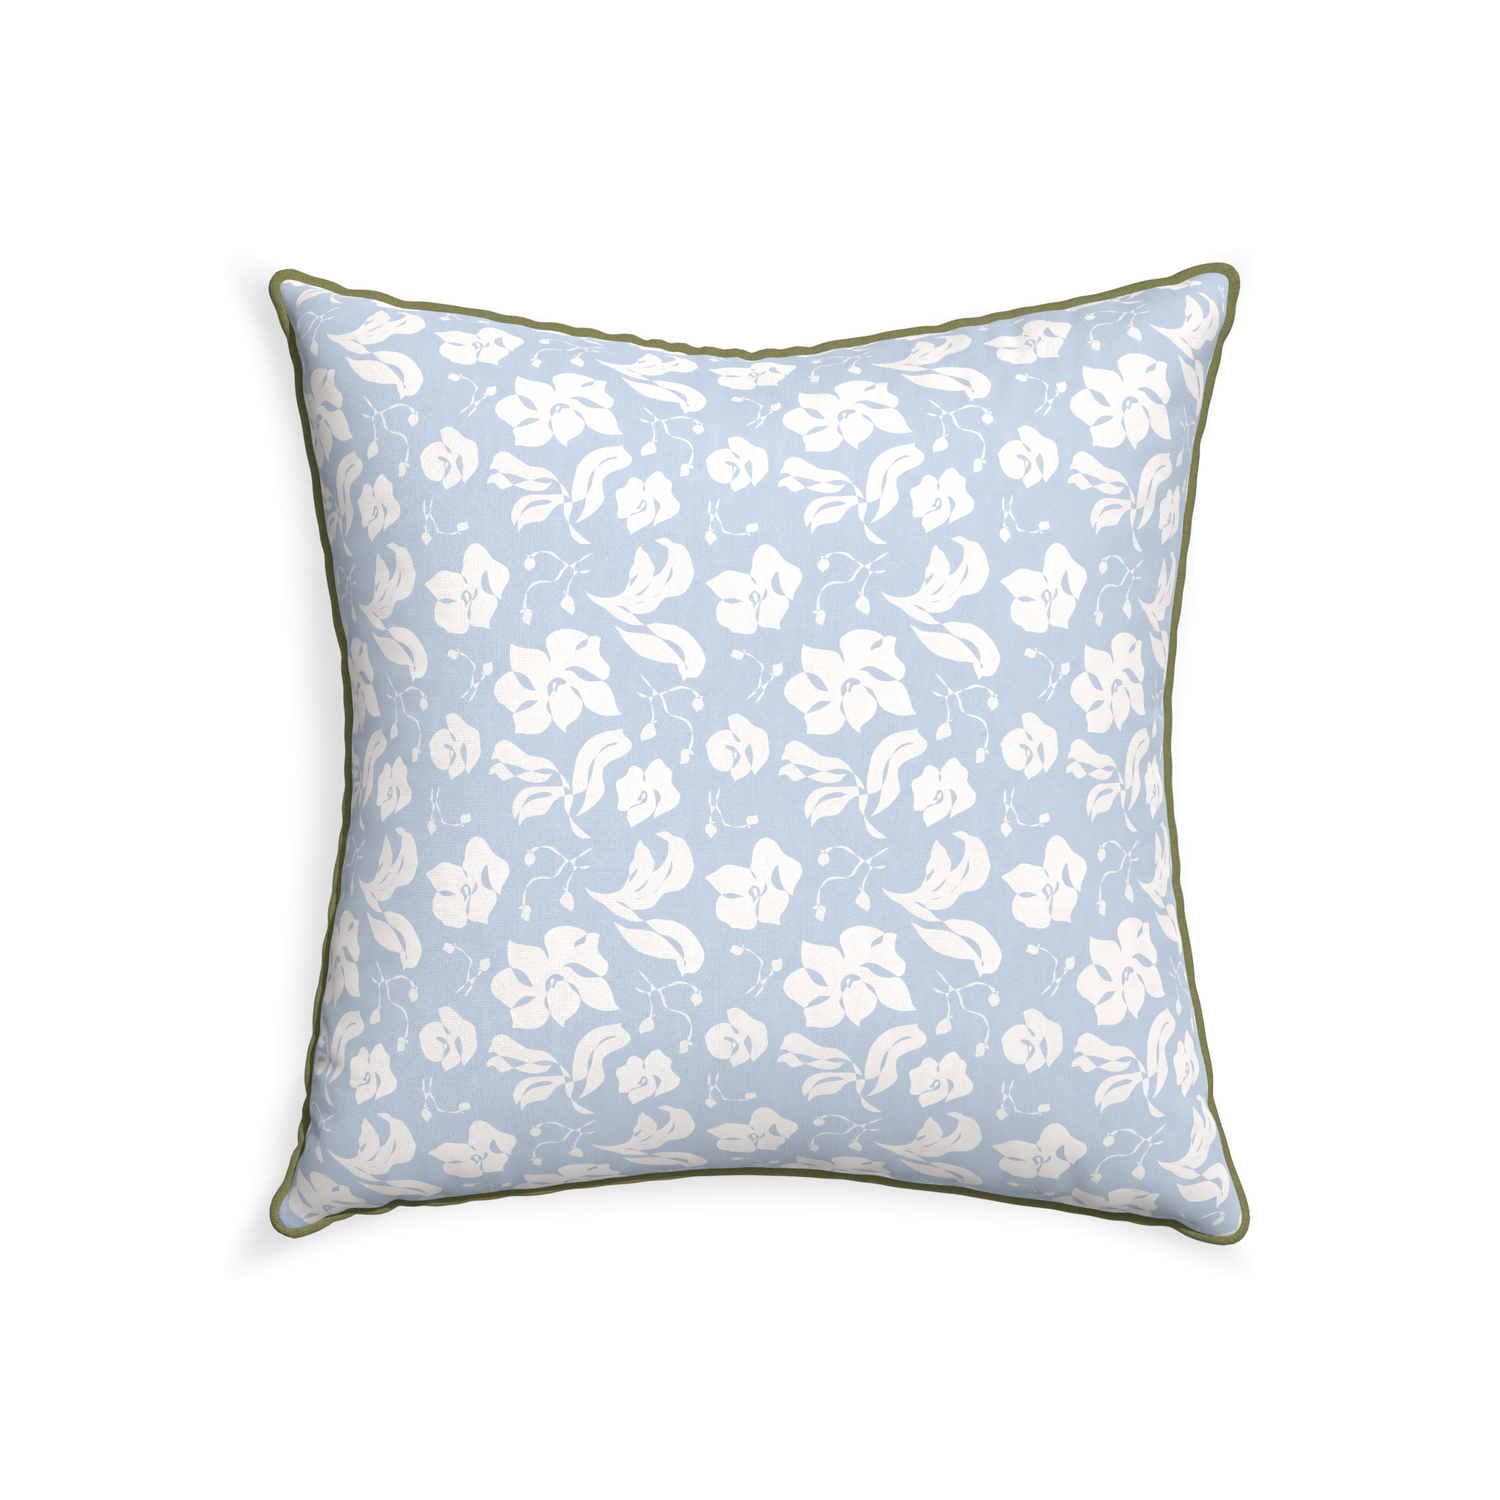 22-square georgia custom cornflower blue floralpillow with moss piping on white background